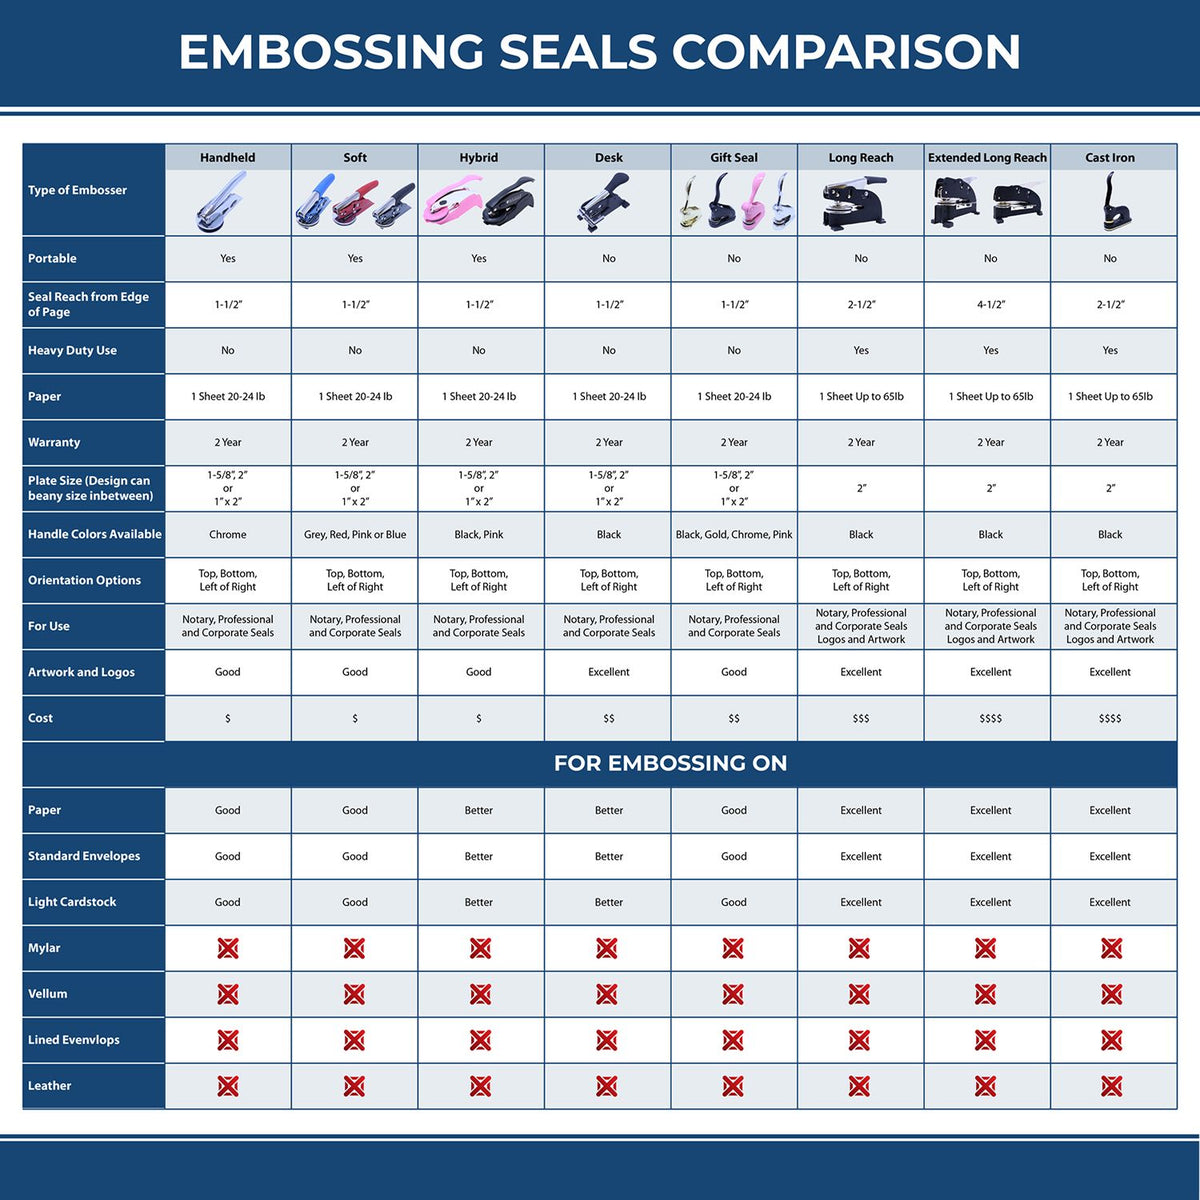 A comparison chart for the different types of mount models available for the Long Reach South Dakota PE Seal.